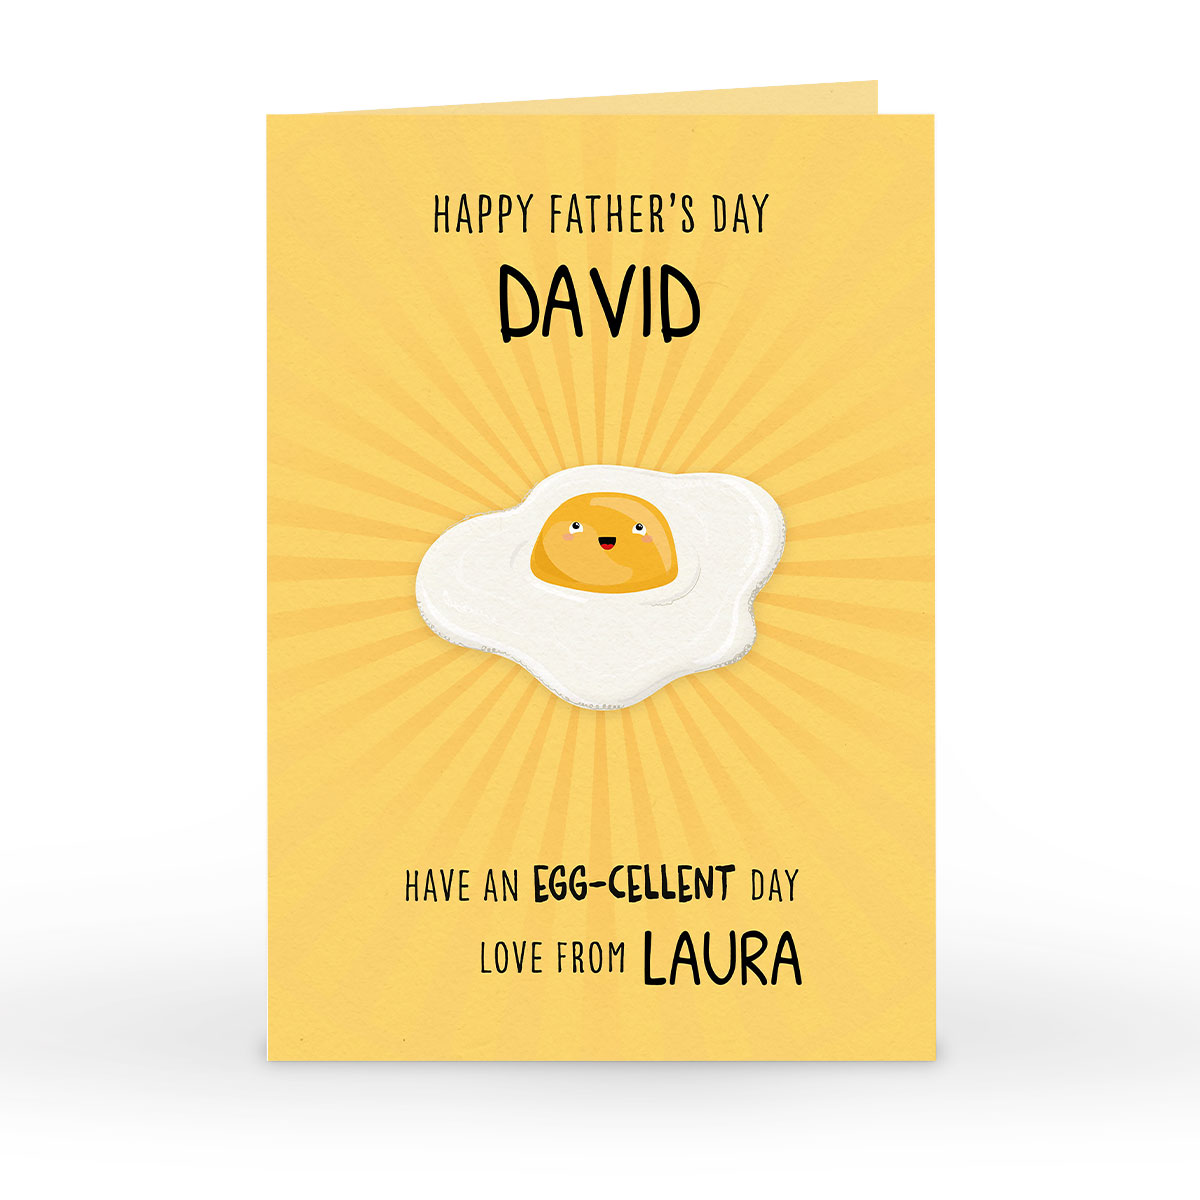 Personalised Father's Day Card - Egg-Cellent Day